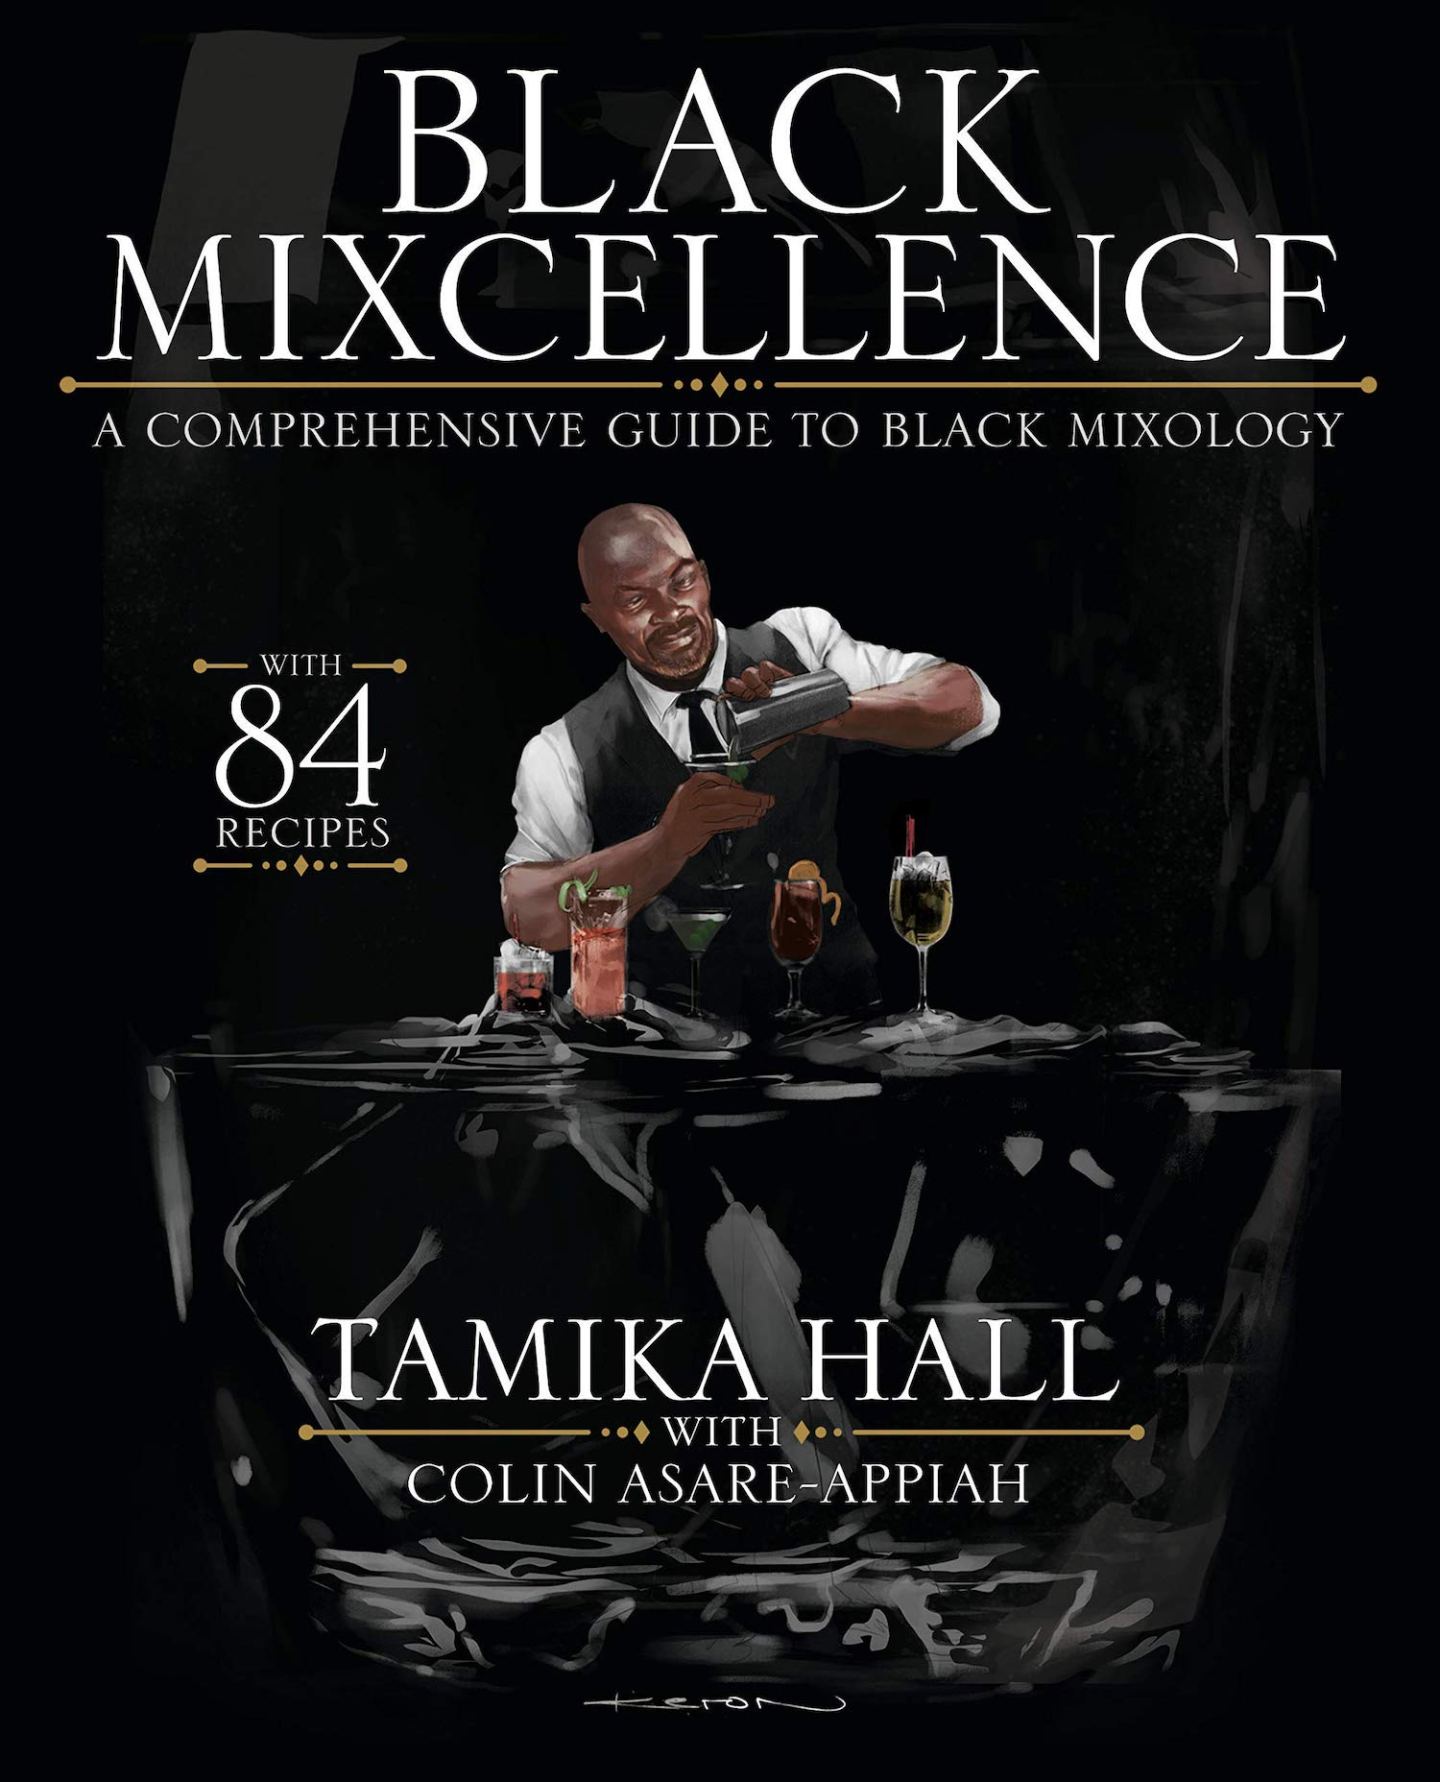 Tamika Hall’s book Black Mixcellence is a comprehensive guide to Black mixology.